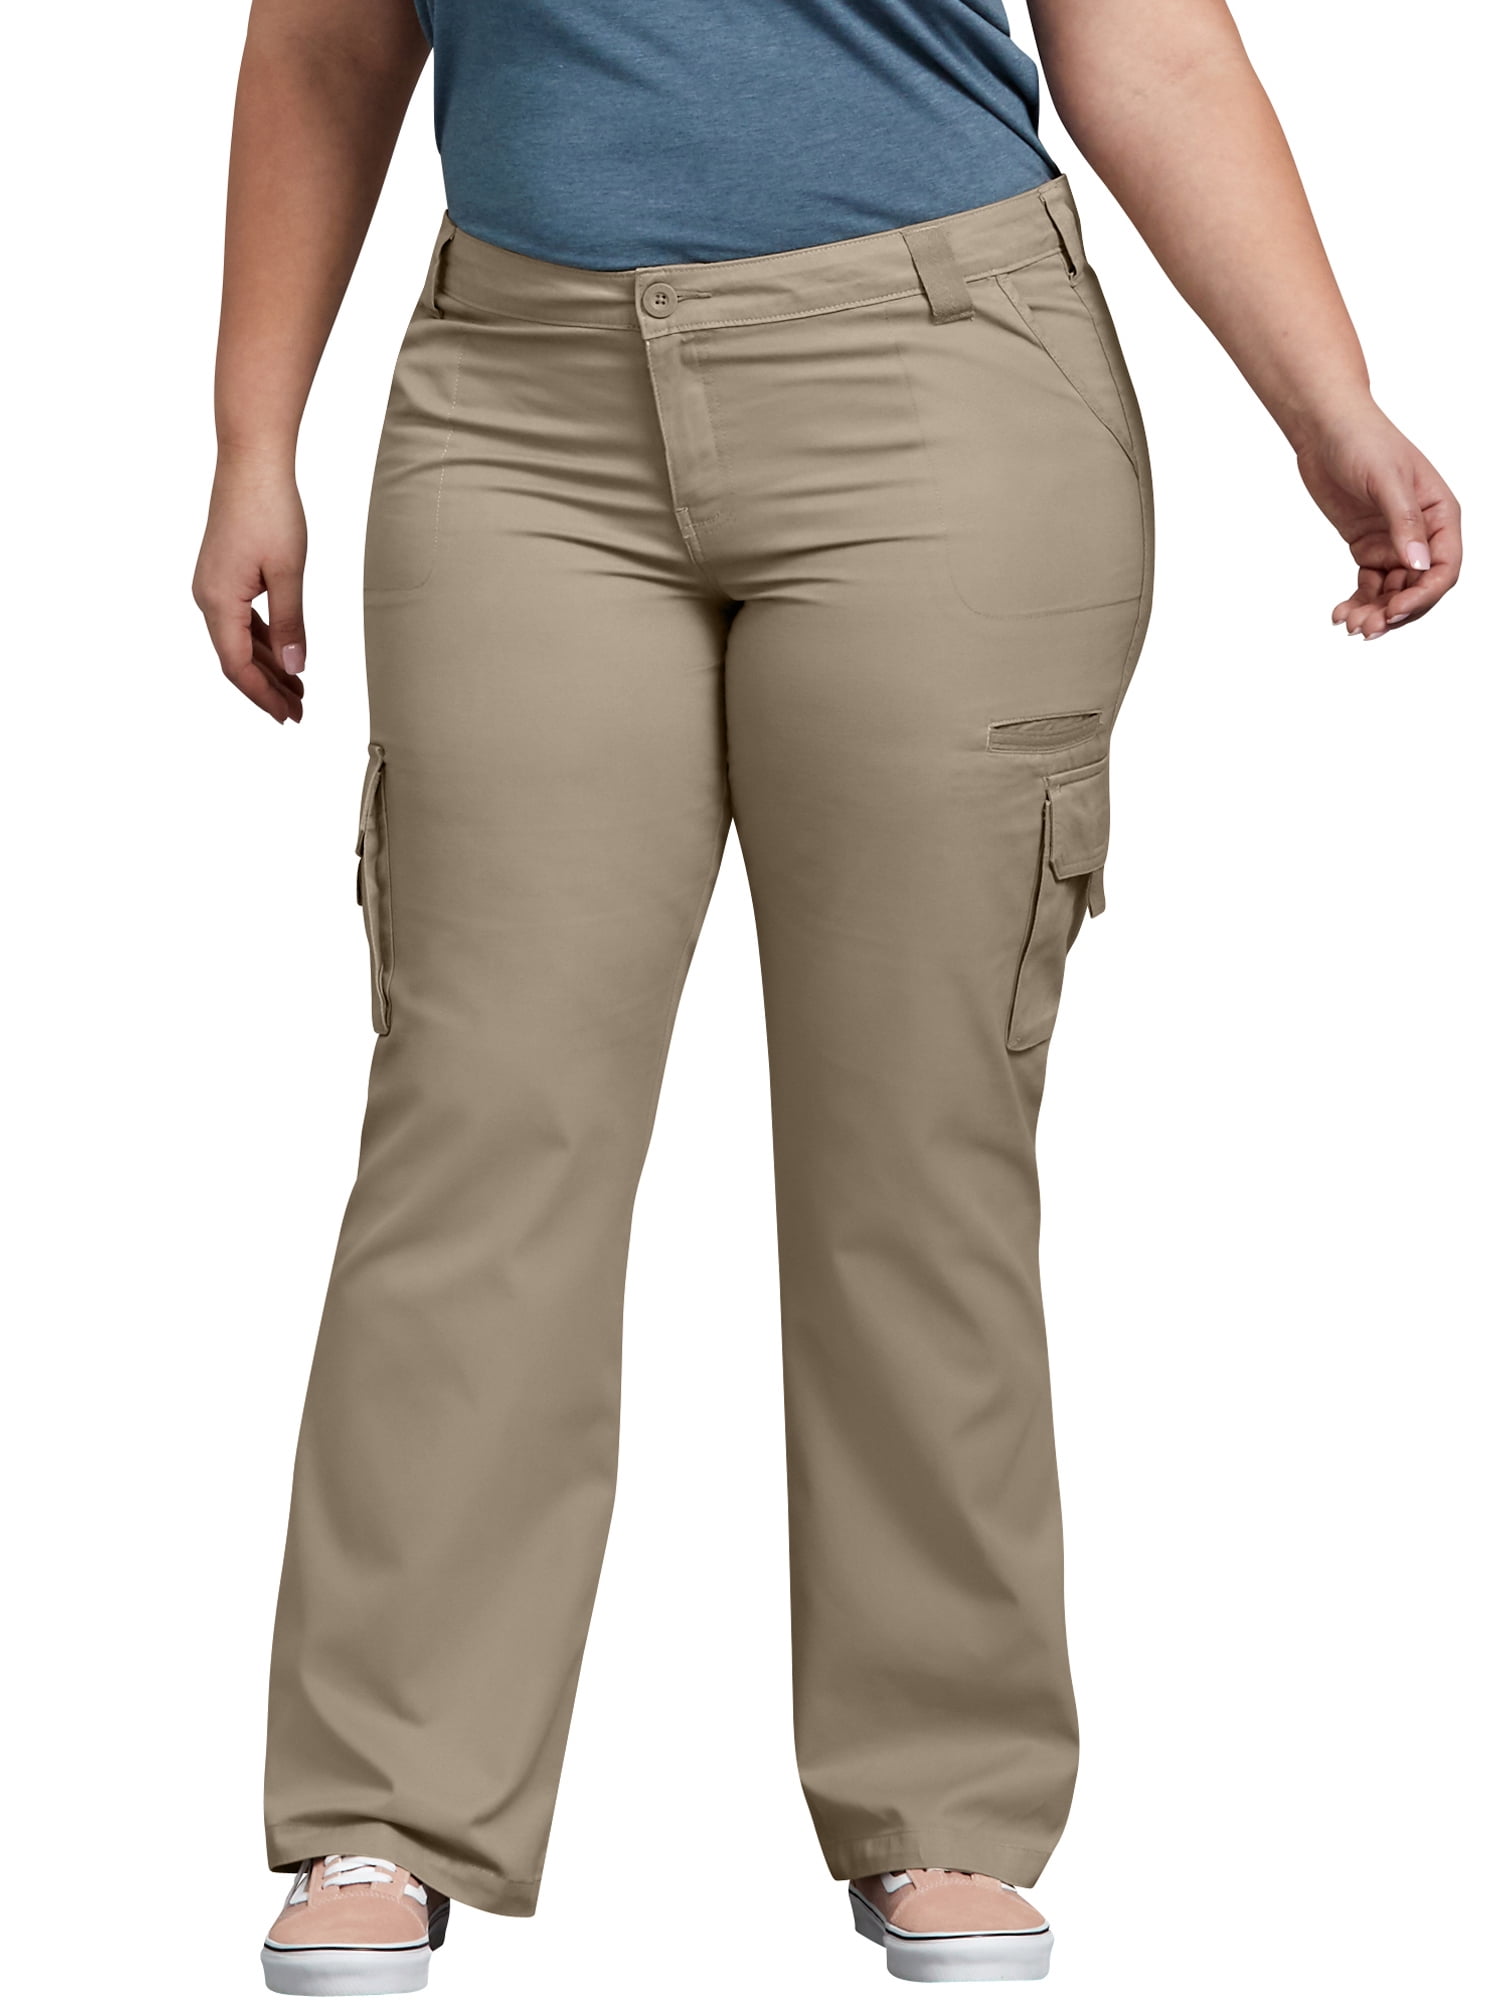 Dickies Ripstop Pants Walmart Outlet  wwwescapeslacumbrees 1693502300